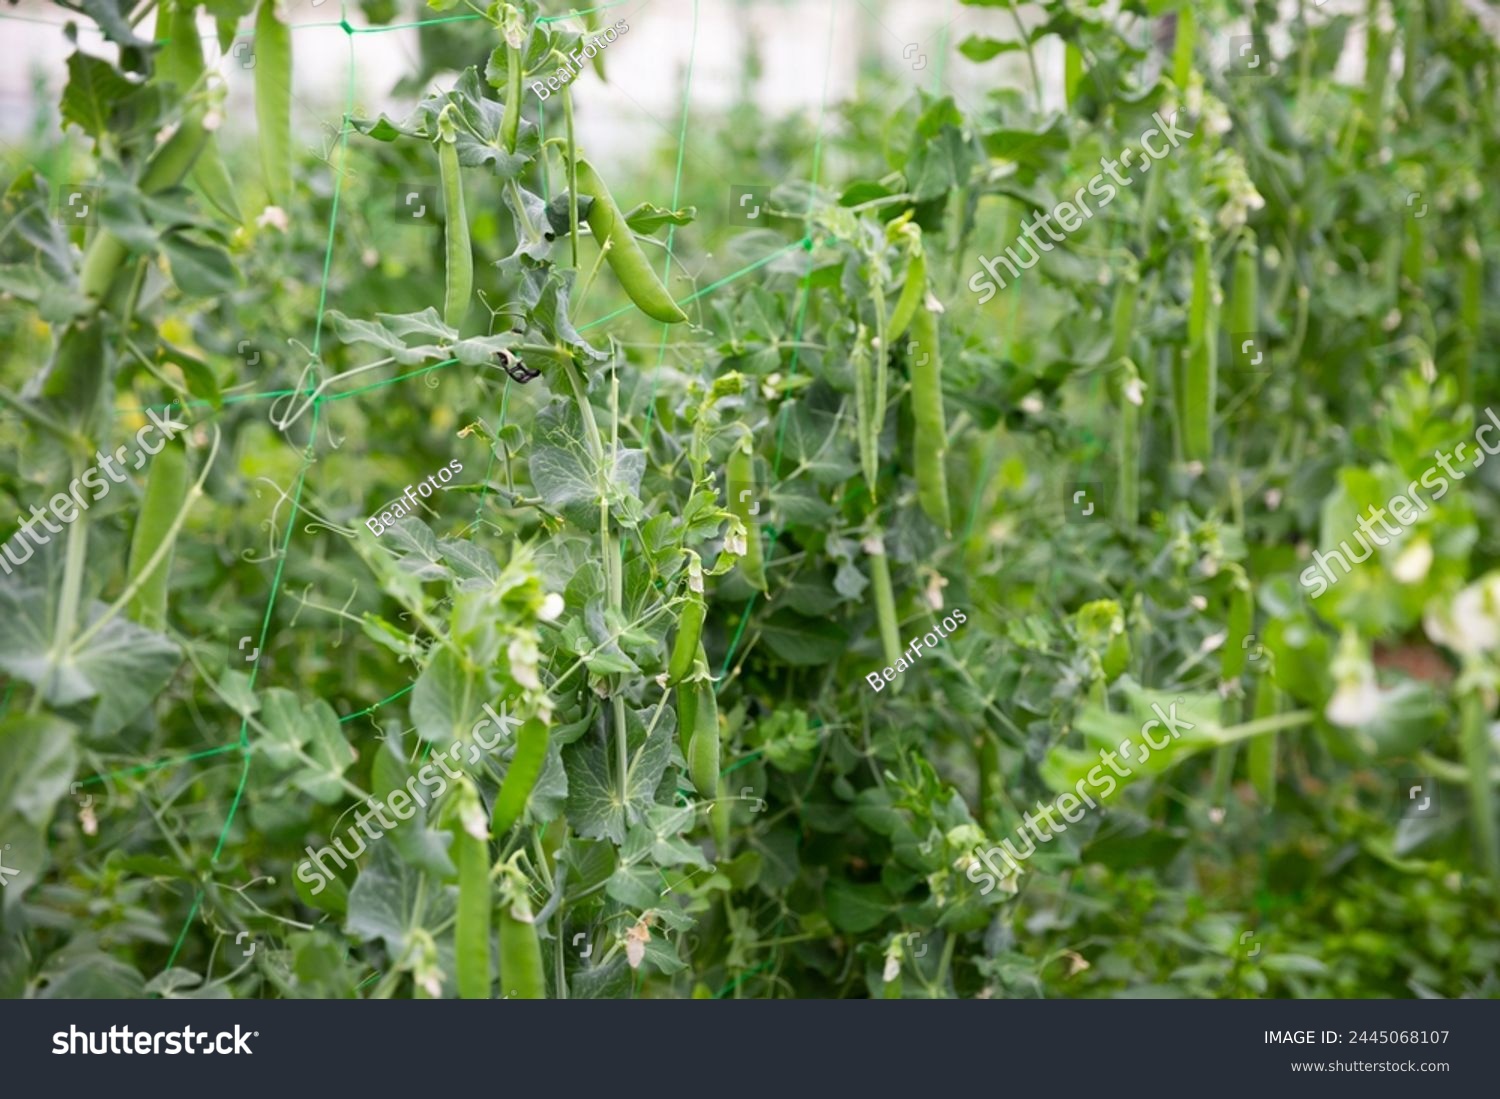 Image of seedlings of pea and soy growing in hothouse, nobody #2445068107